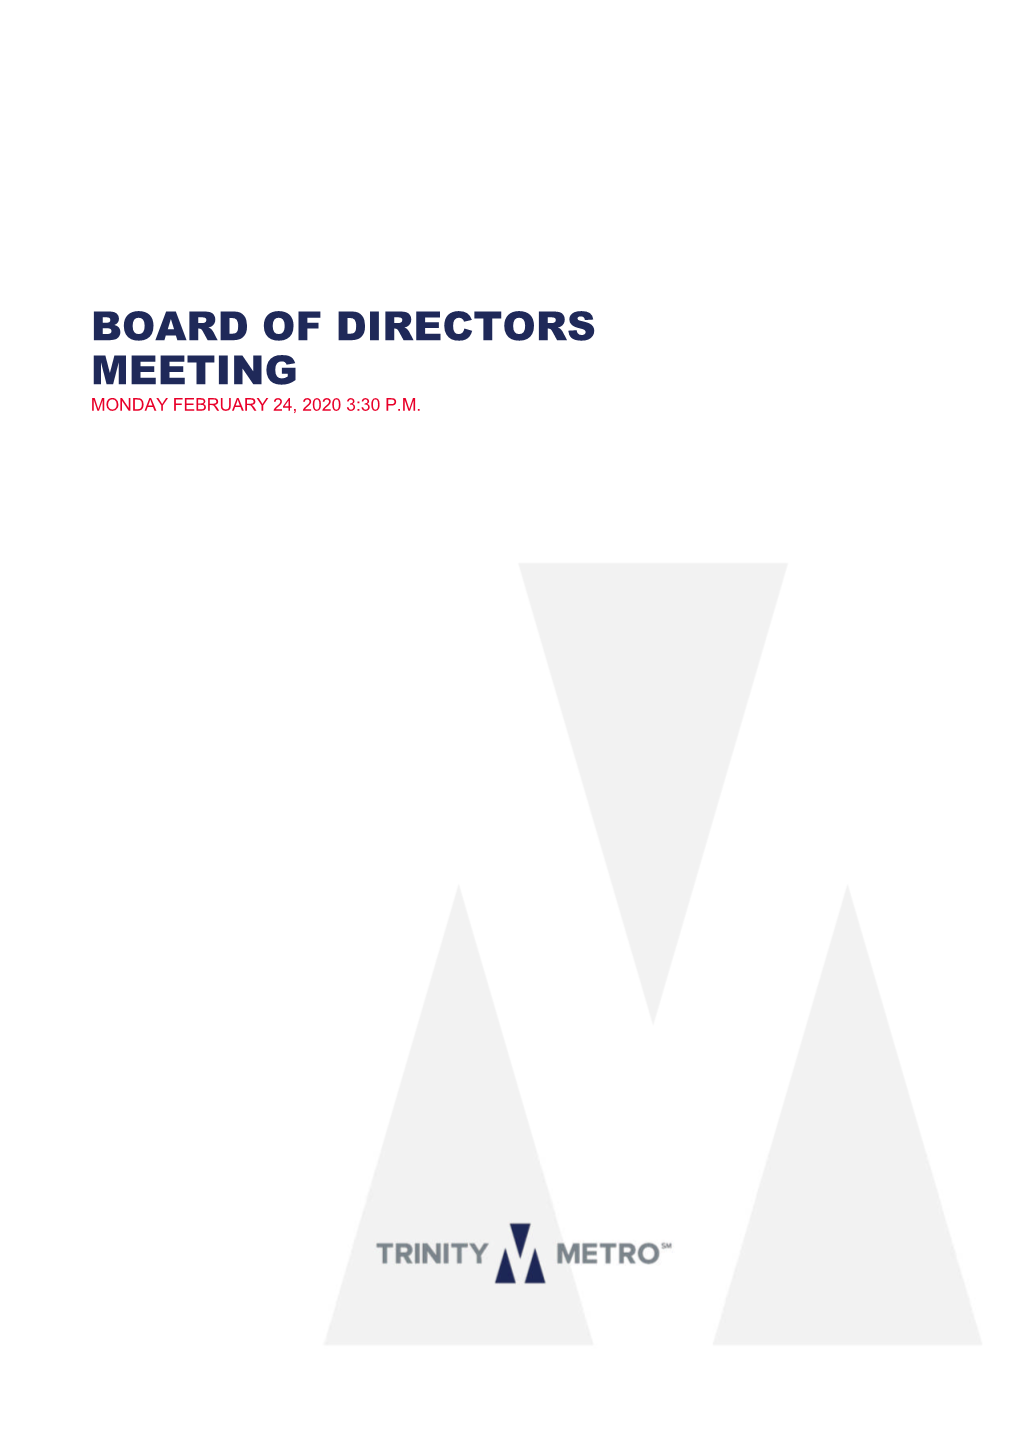 Board of Directors Meeting Monday February 24, 2020 3:30 P.M